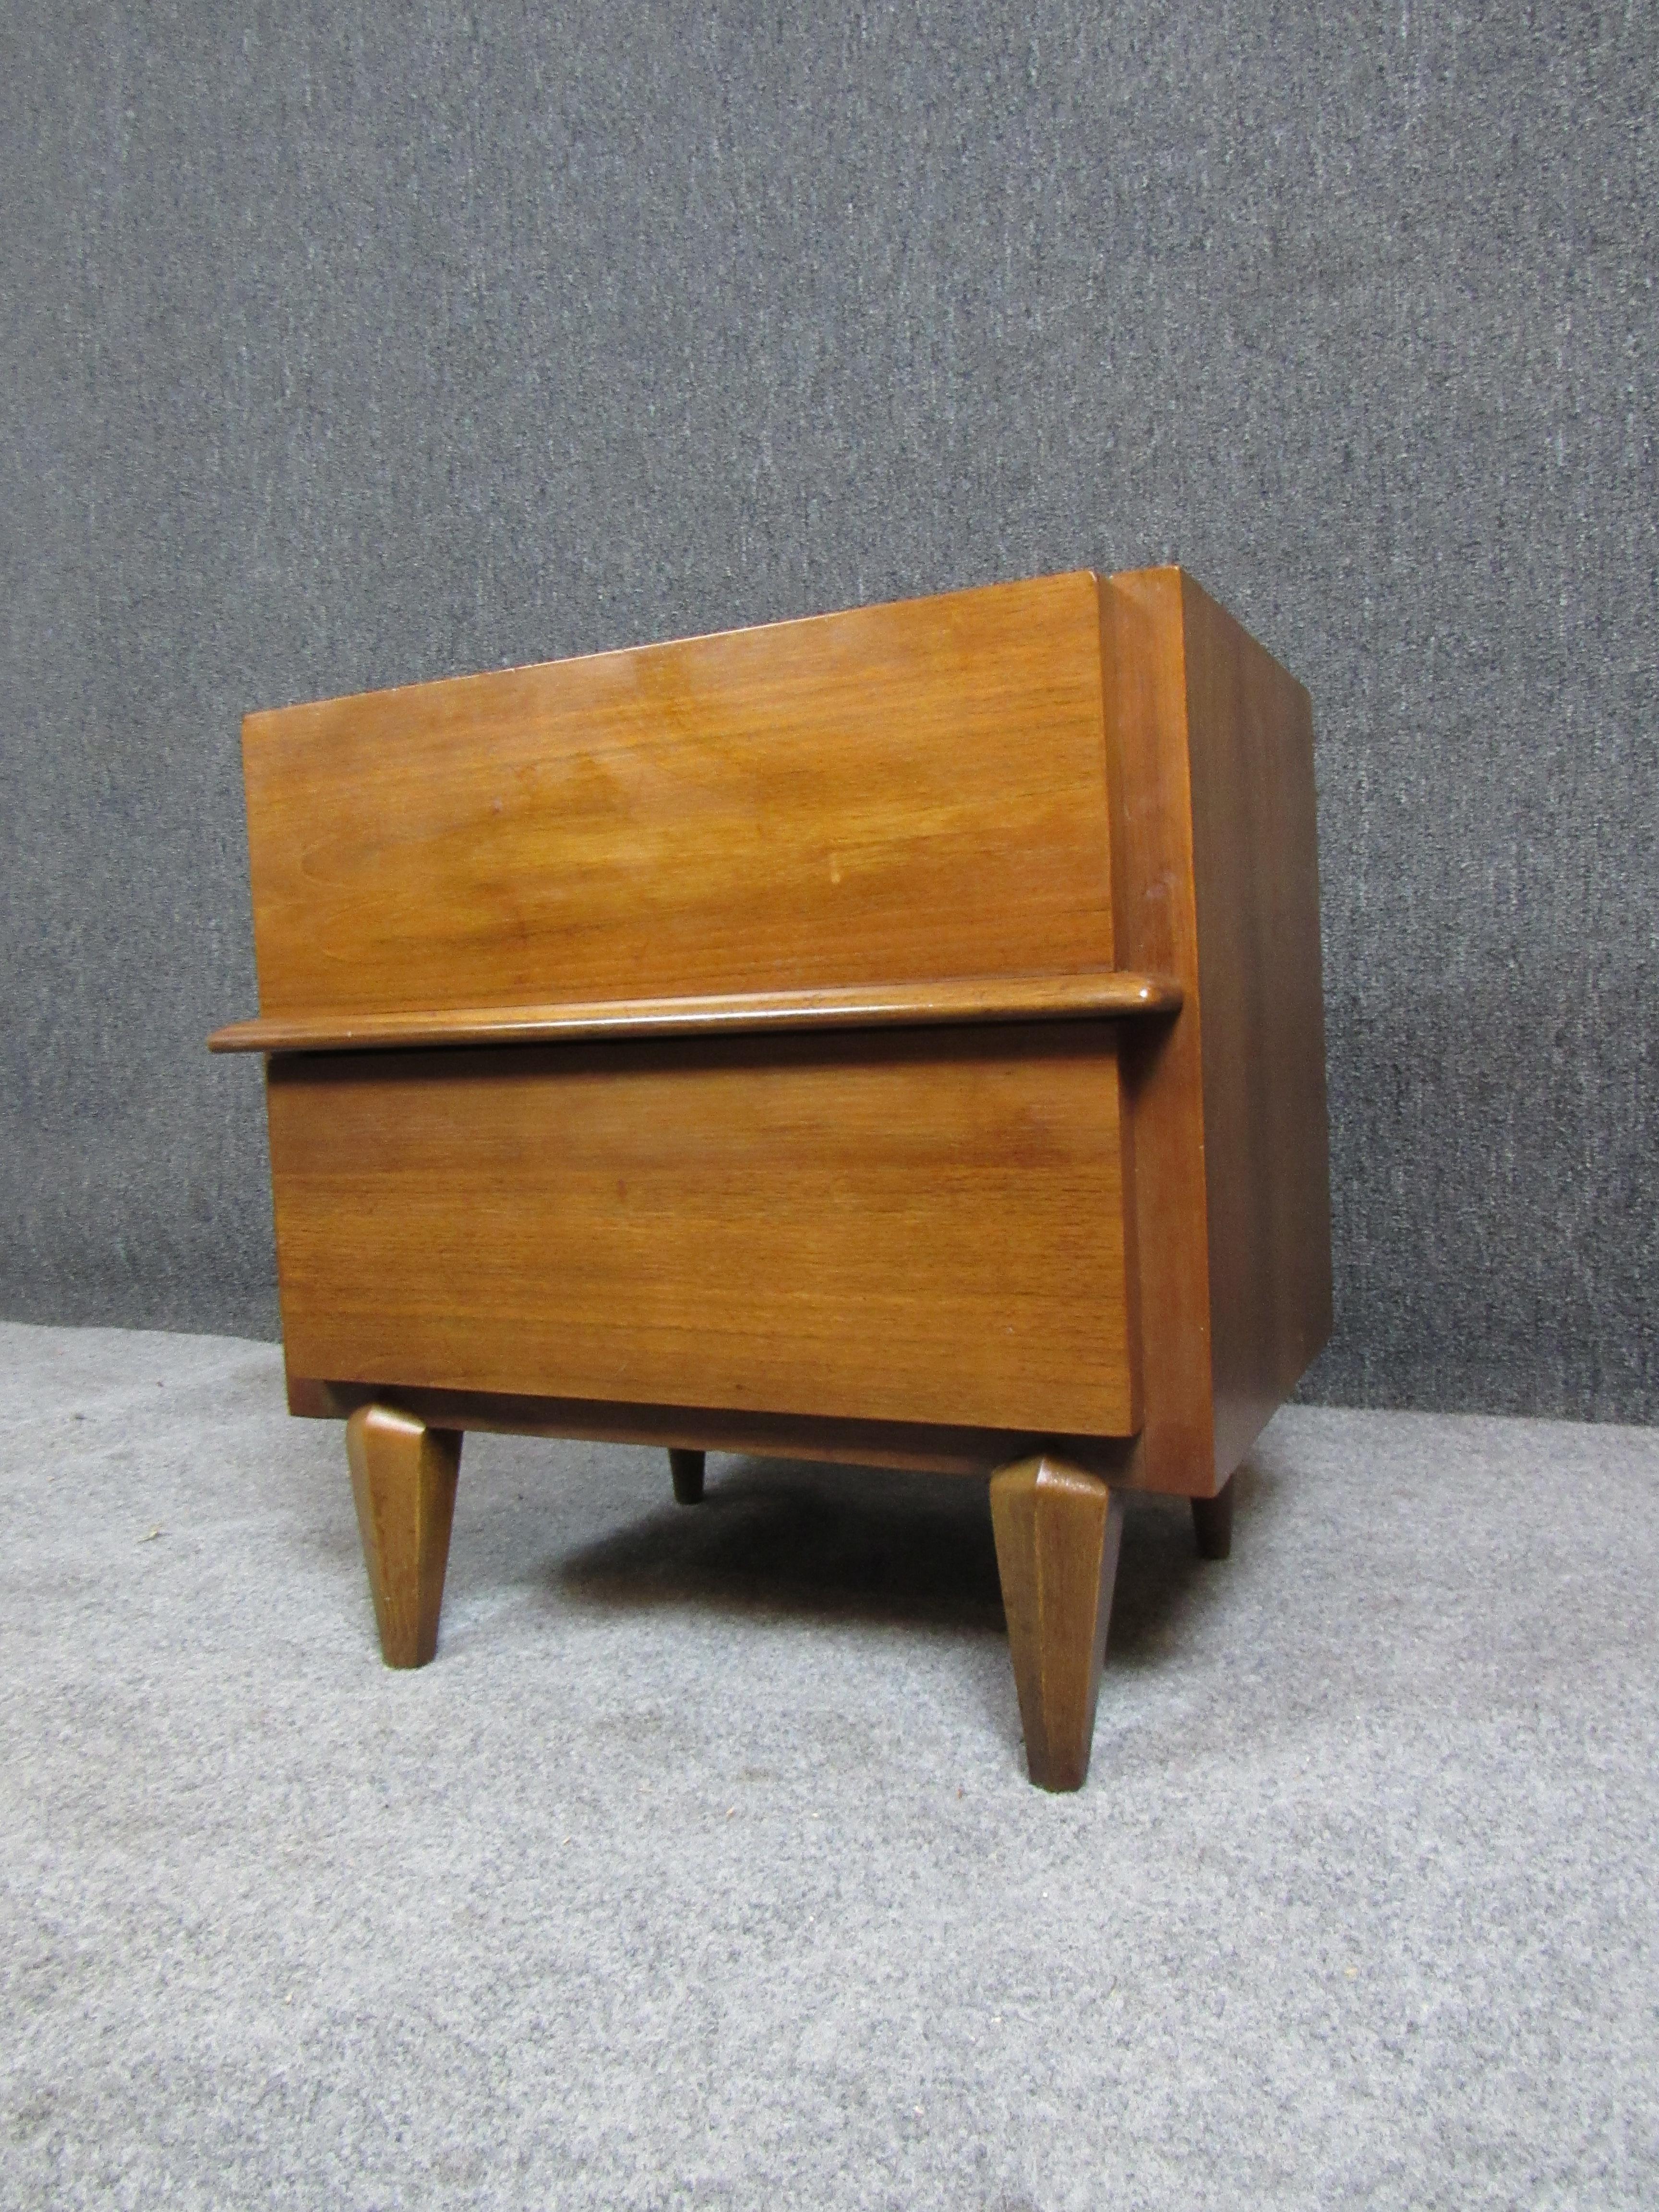 Fantastic single mid-century nightstand from the renowned furniture builders at American of Martinsville. Featuring a chunky, almost primitive design, the broad structure highlights a mesmerizing walnut grain. Two ample drawers provide plenty of